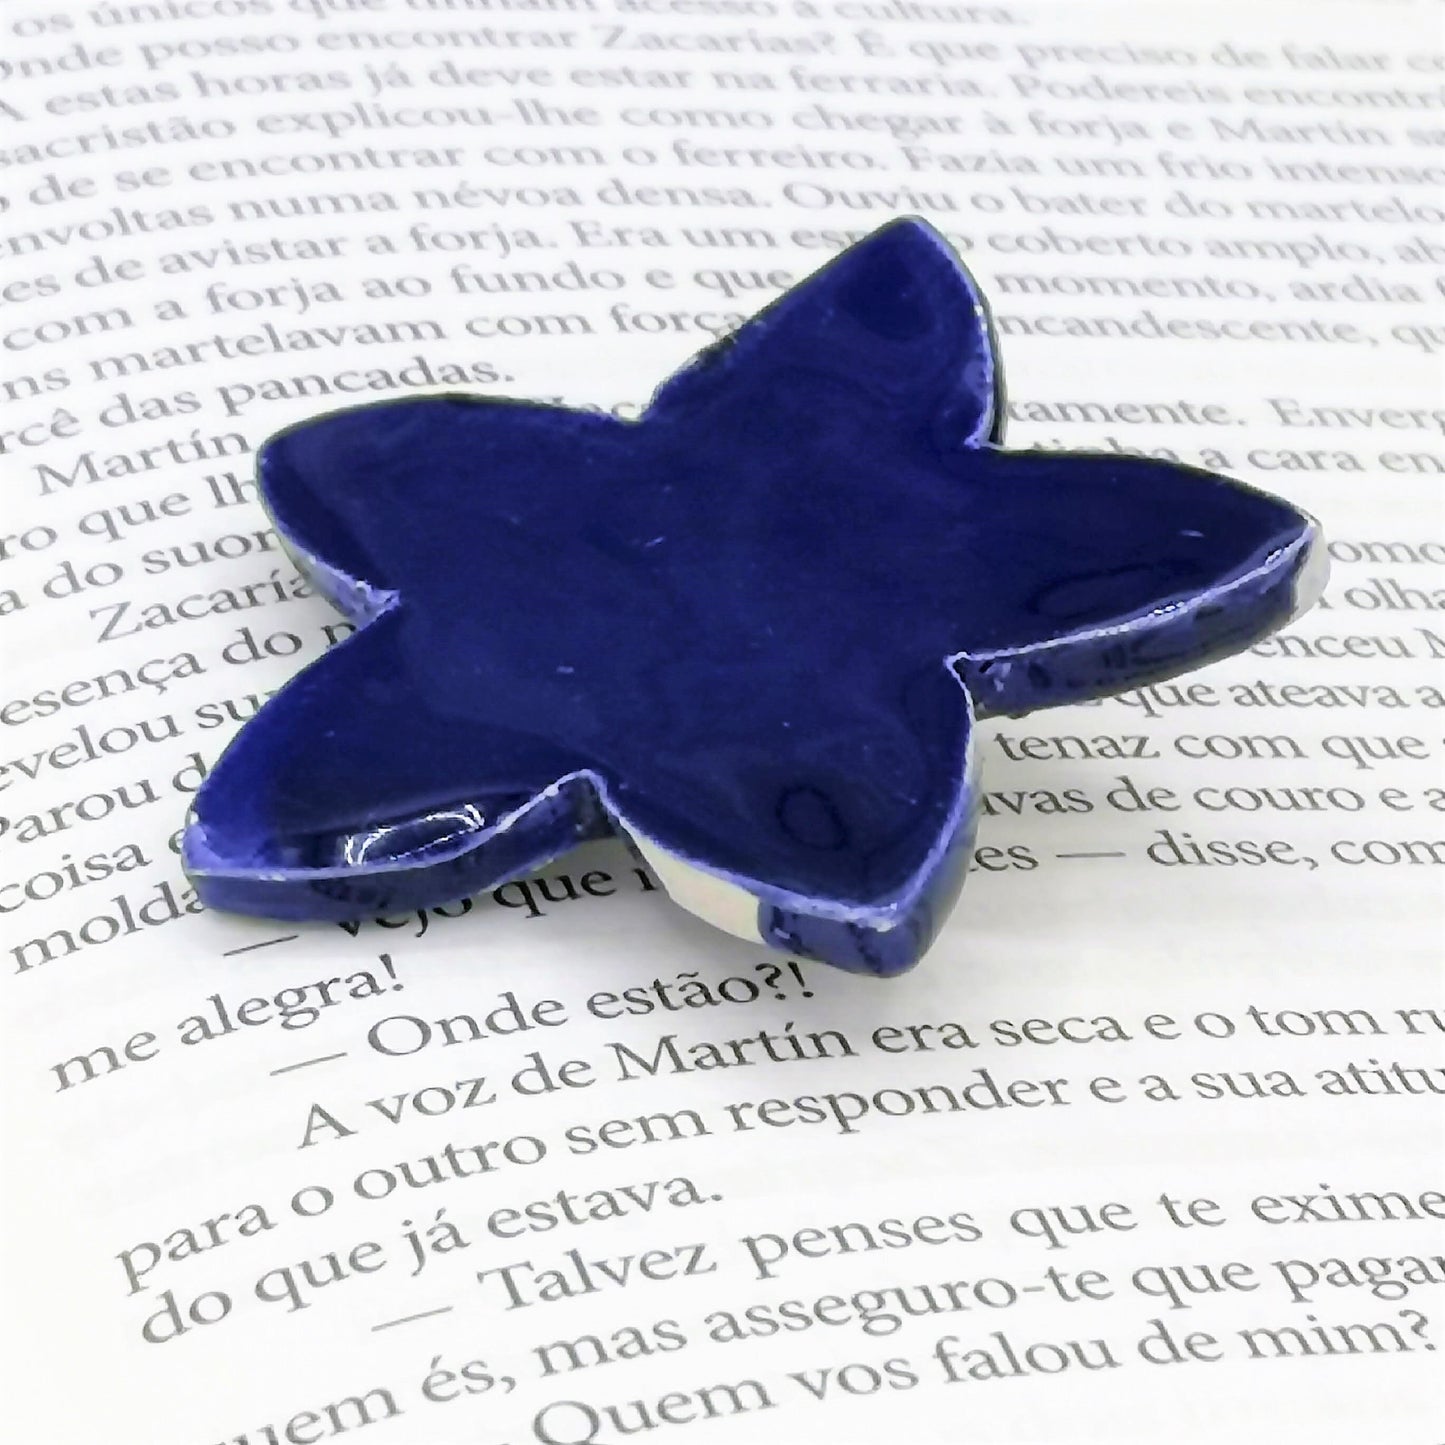 Unique Handmade Ceramic Glssy Dark Blue Star Brooch For Women, Clay Broach Pin For Her, Small Celestial Scarf Brooch Gift For Wife - Ceramica Ana Rafael